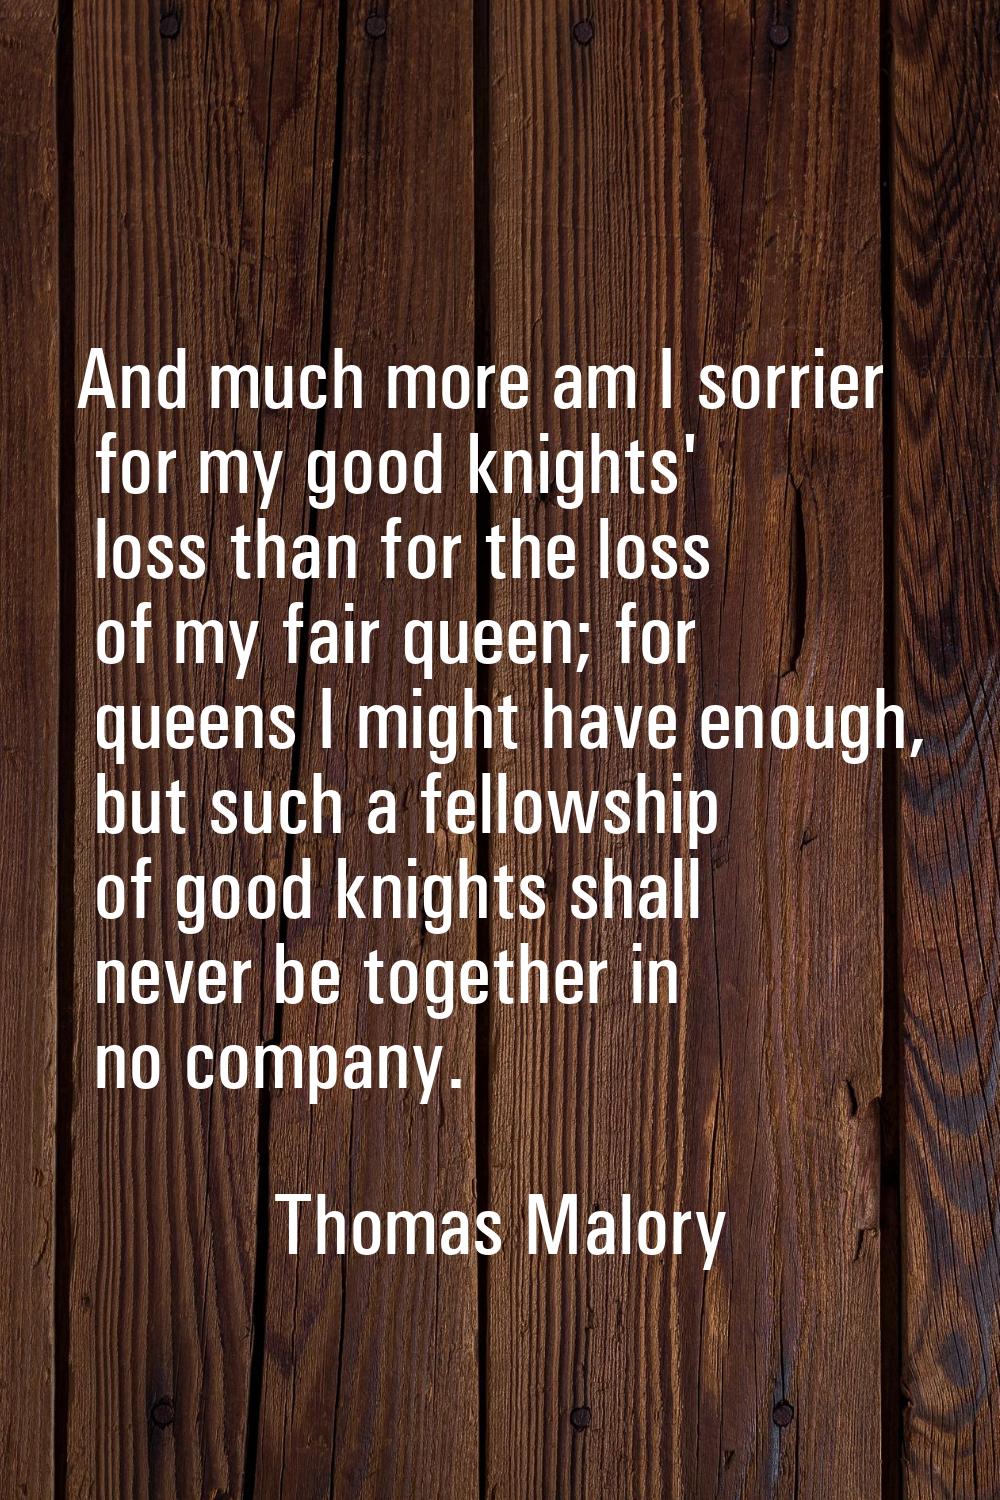 And much more am I sorrier for my good knights' loss than for the loss of my fair queen; for queens